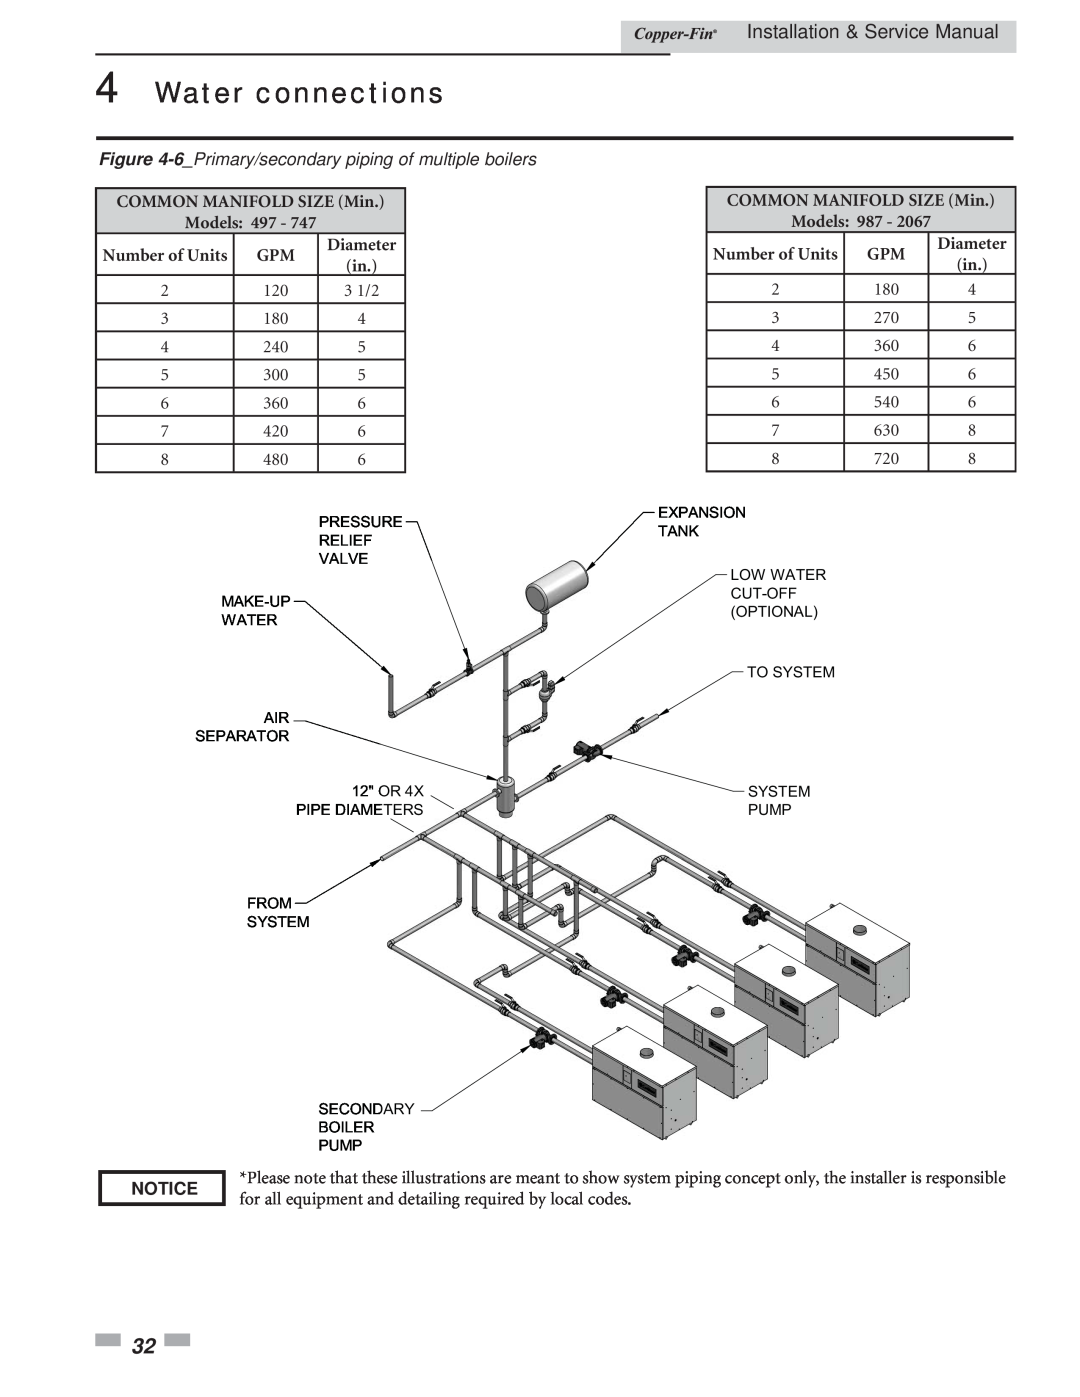 Lochinvar 497 - 2067 service manual Water connections, Installation & Service Manual, 3 1/2, Notice 